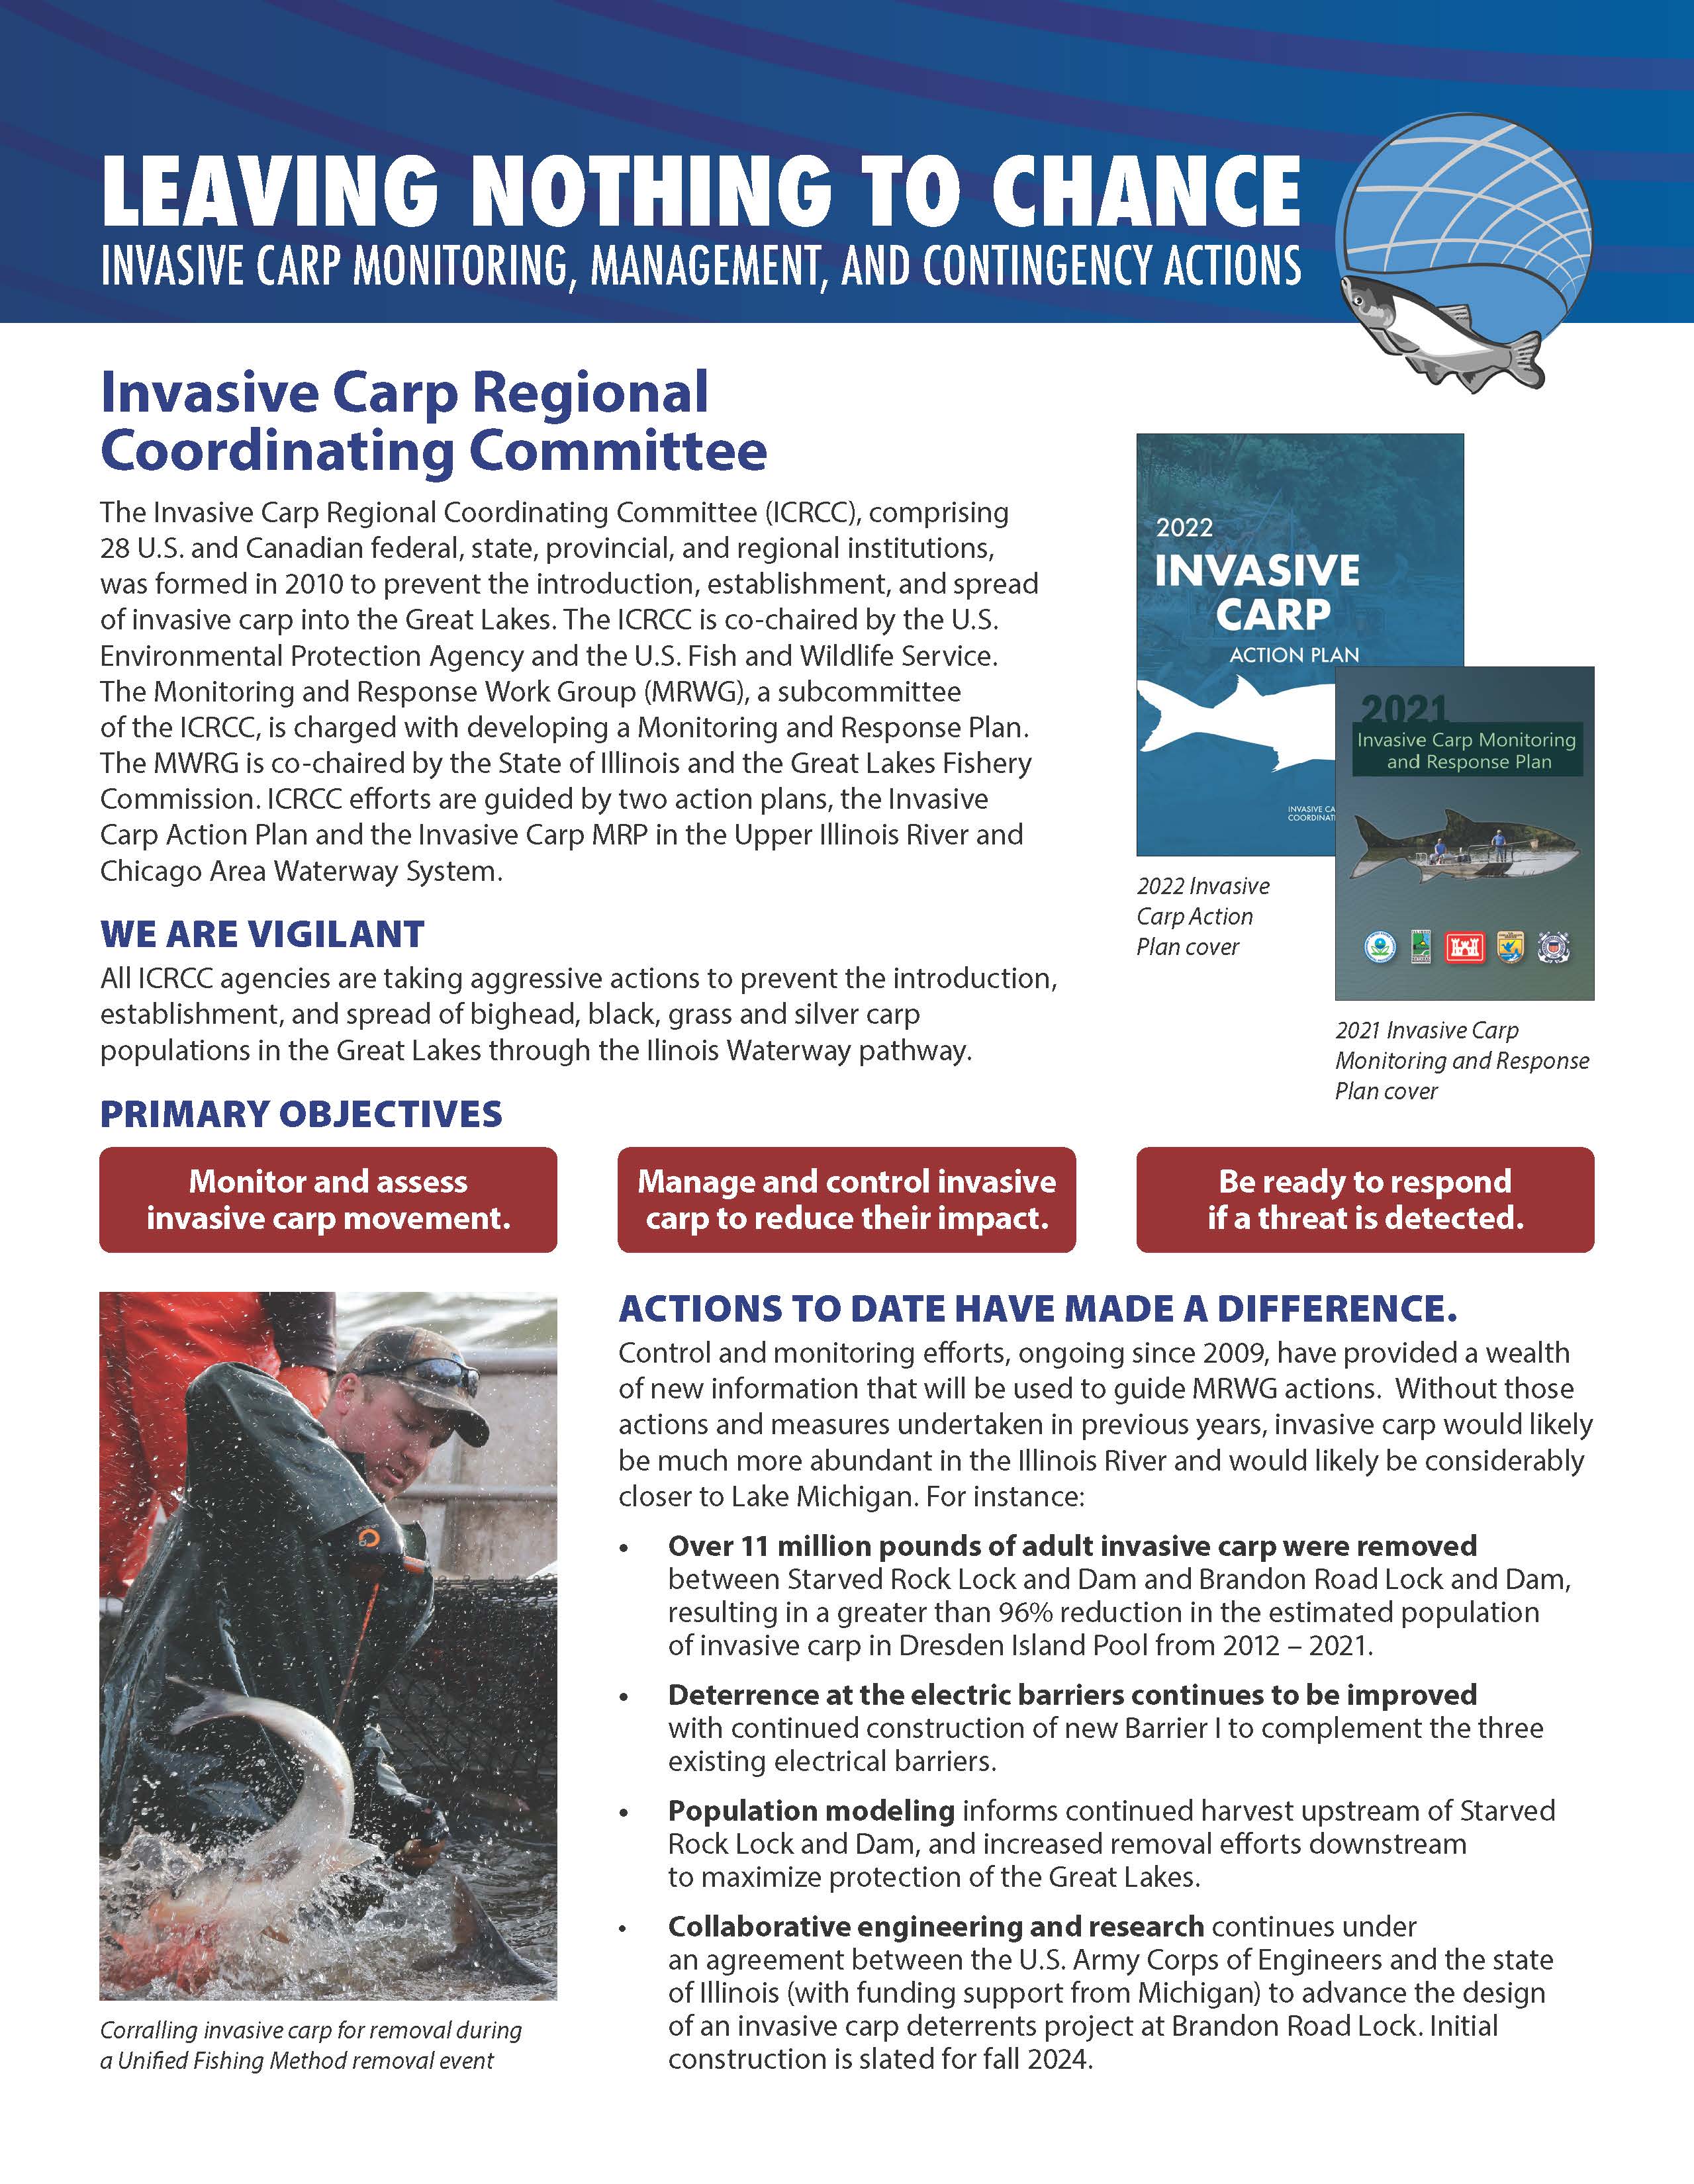 Leaving Nothing To Chance: Invasive Carp Monitoring, Management, and Contingency Actions handout